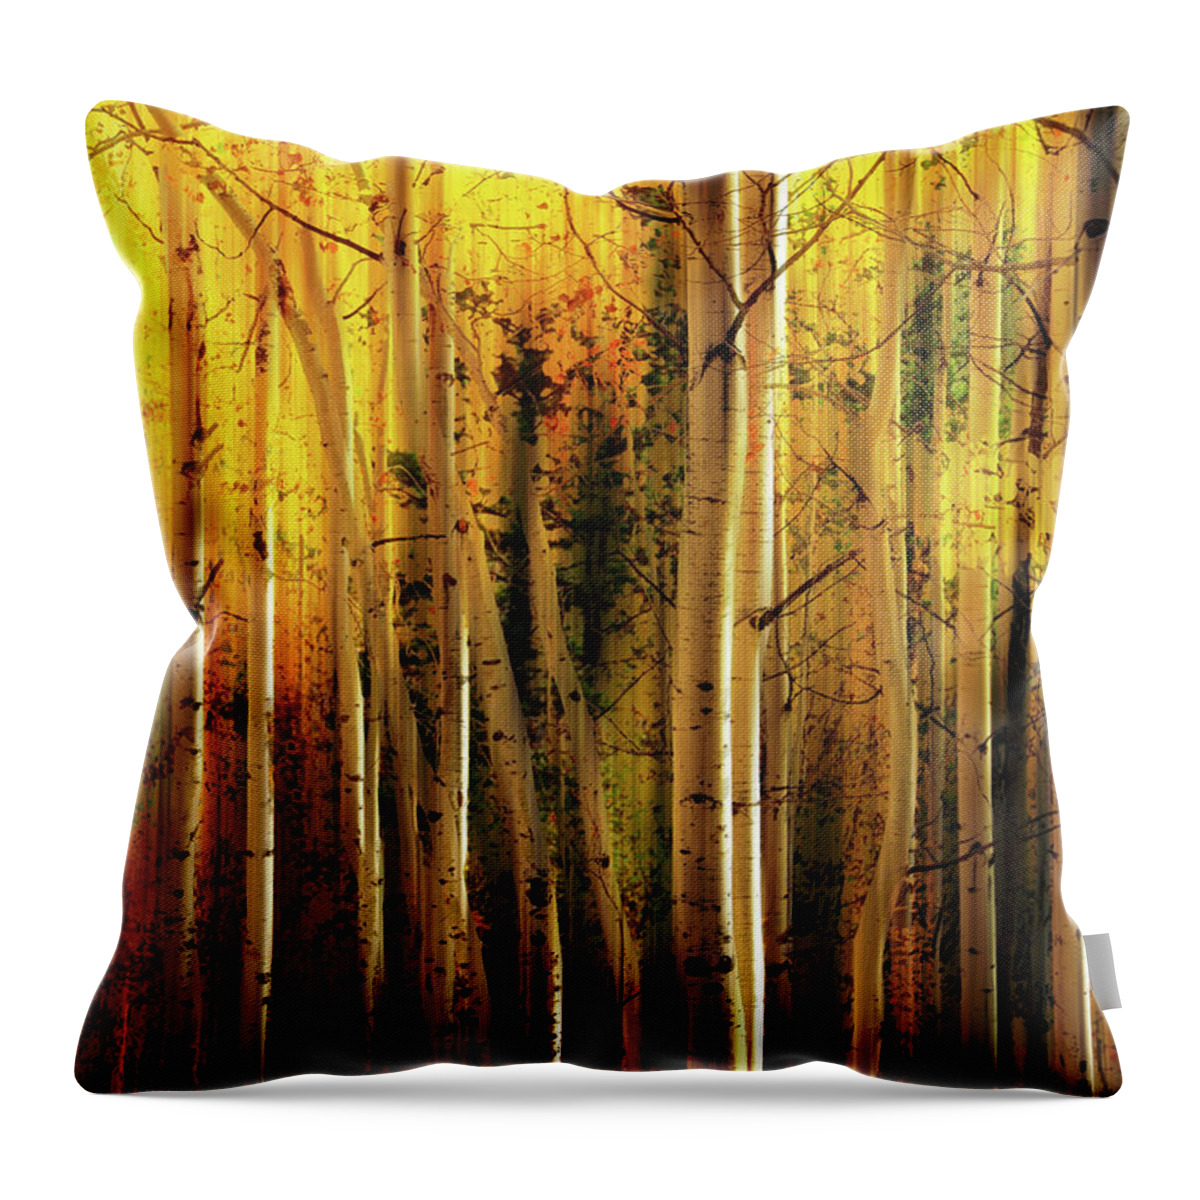 Aspen Glory Throw Pillow featuring the photograph Aspen Glory by Dan Sproul